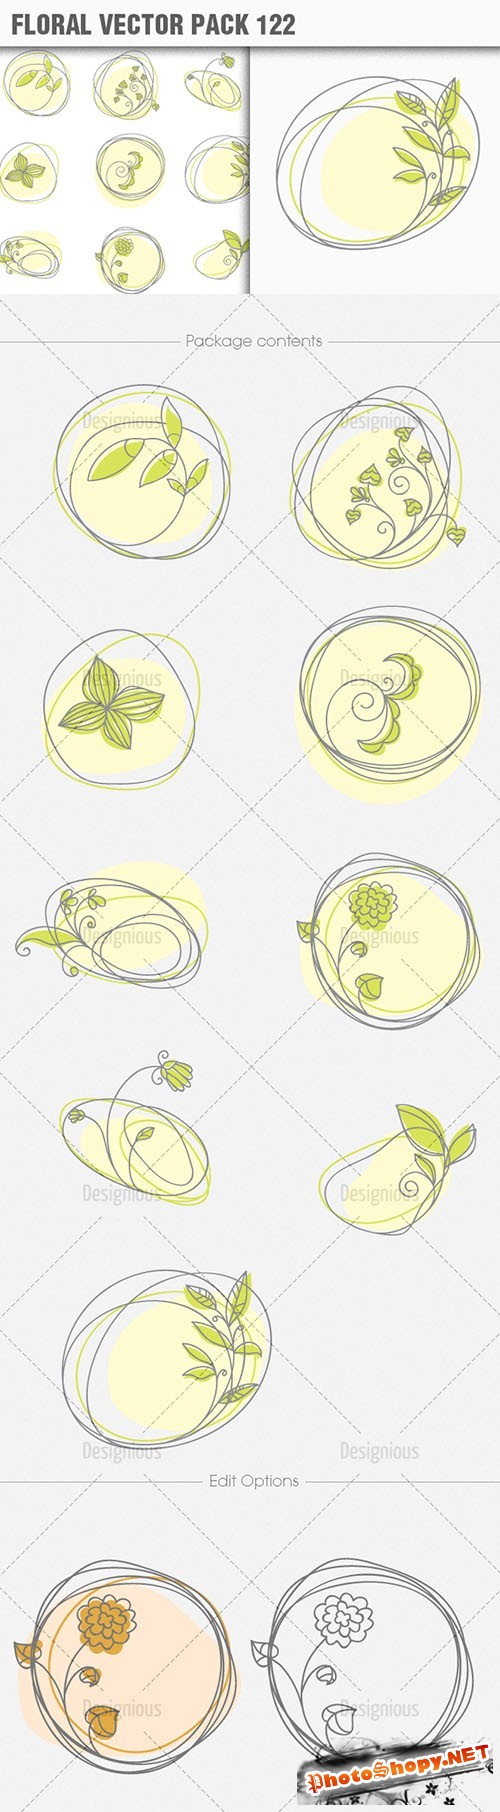 Floral Vector Pack 122